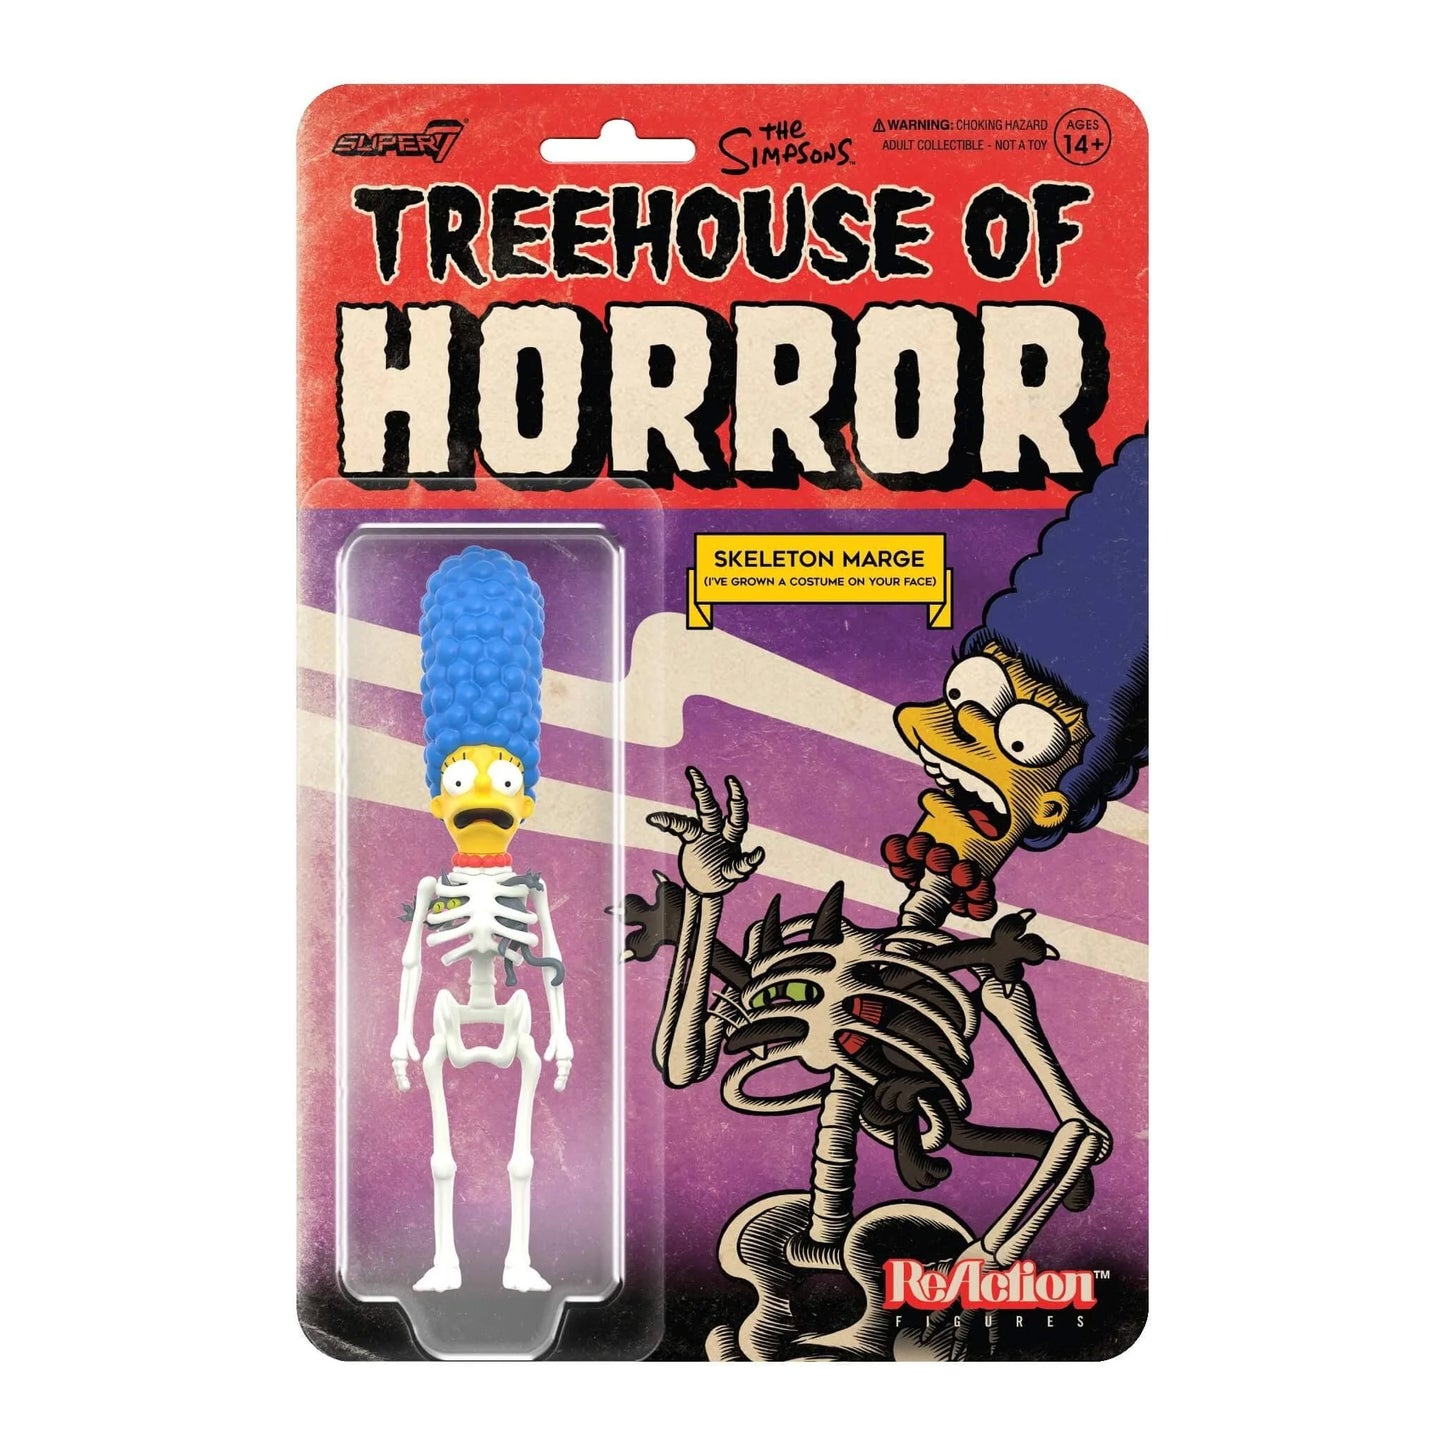 Super7 The Simpsons Treehouse of Horror ReAction Skeleton Marge Figure Main Results Image Carousel